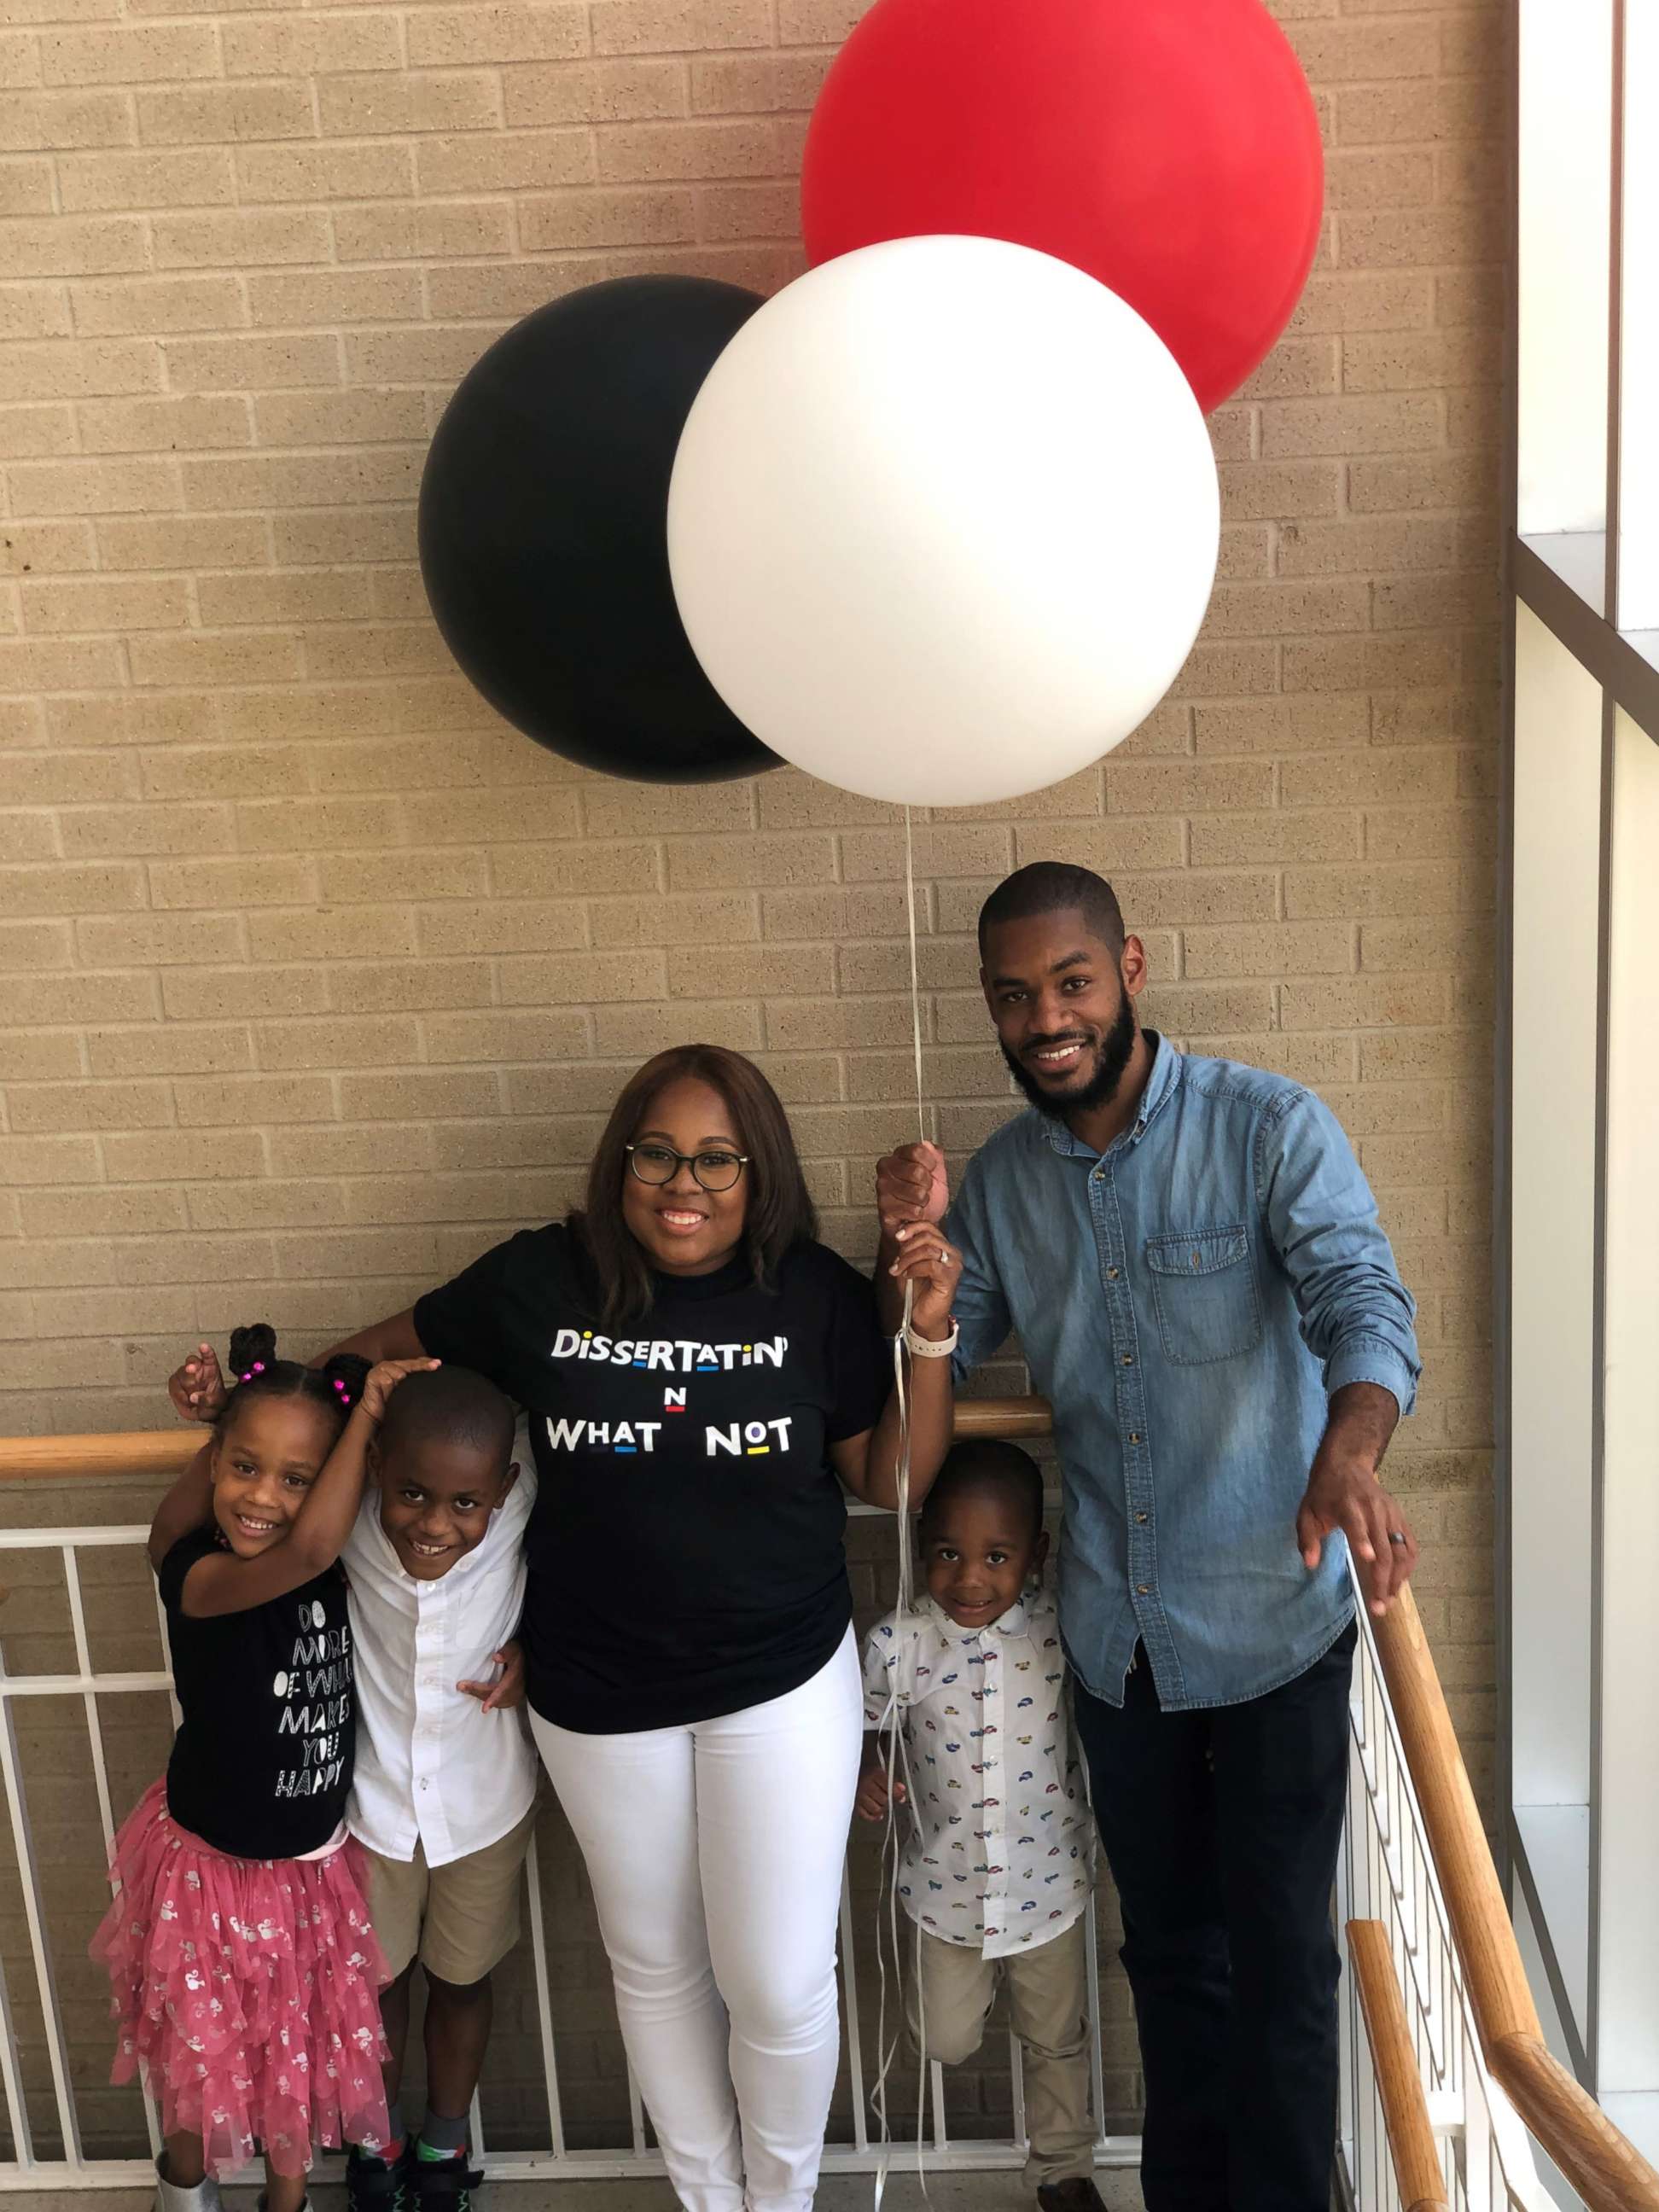 PHOTO: Candace Hall was surprised by her three children after defending her dissertation thesis for a doctorate in education.